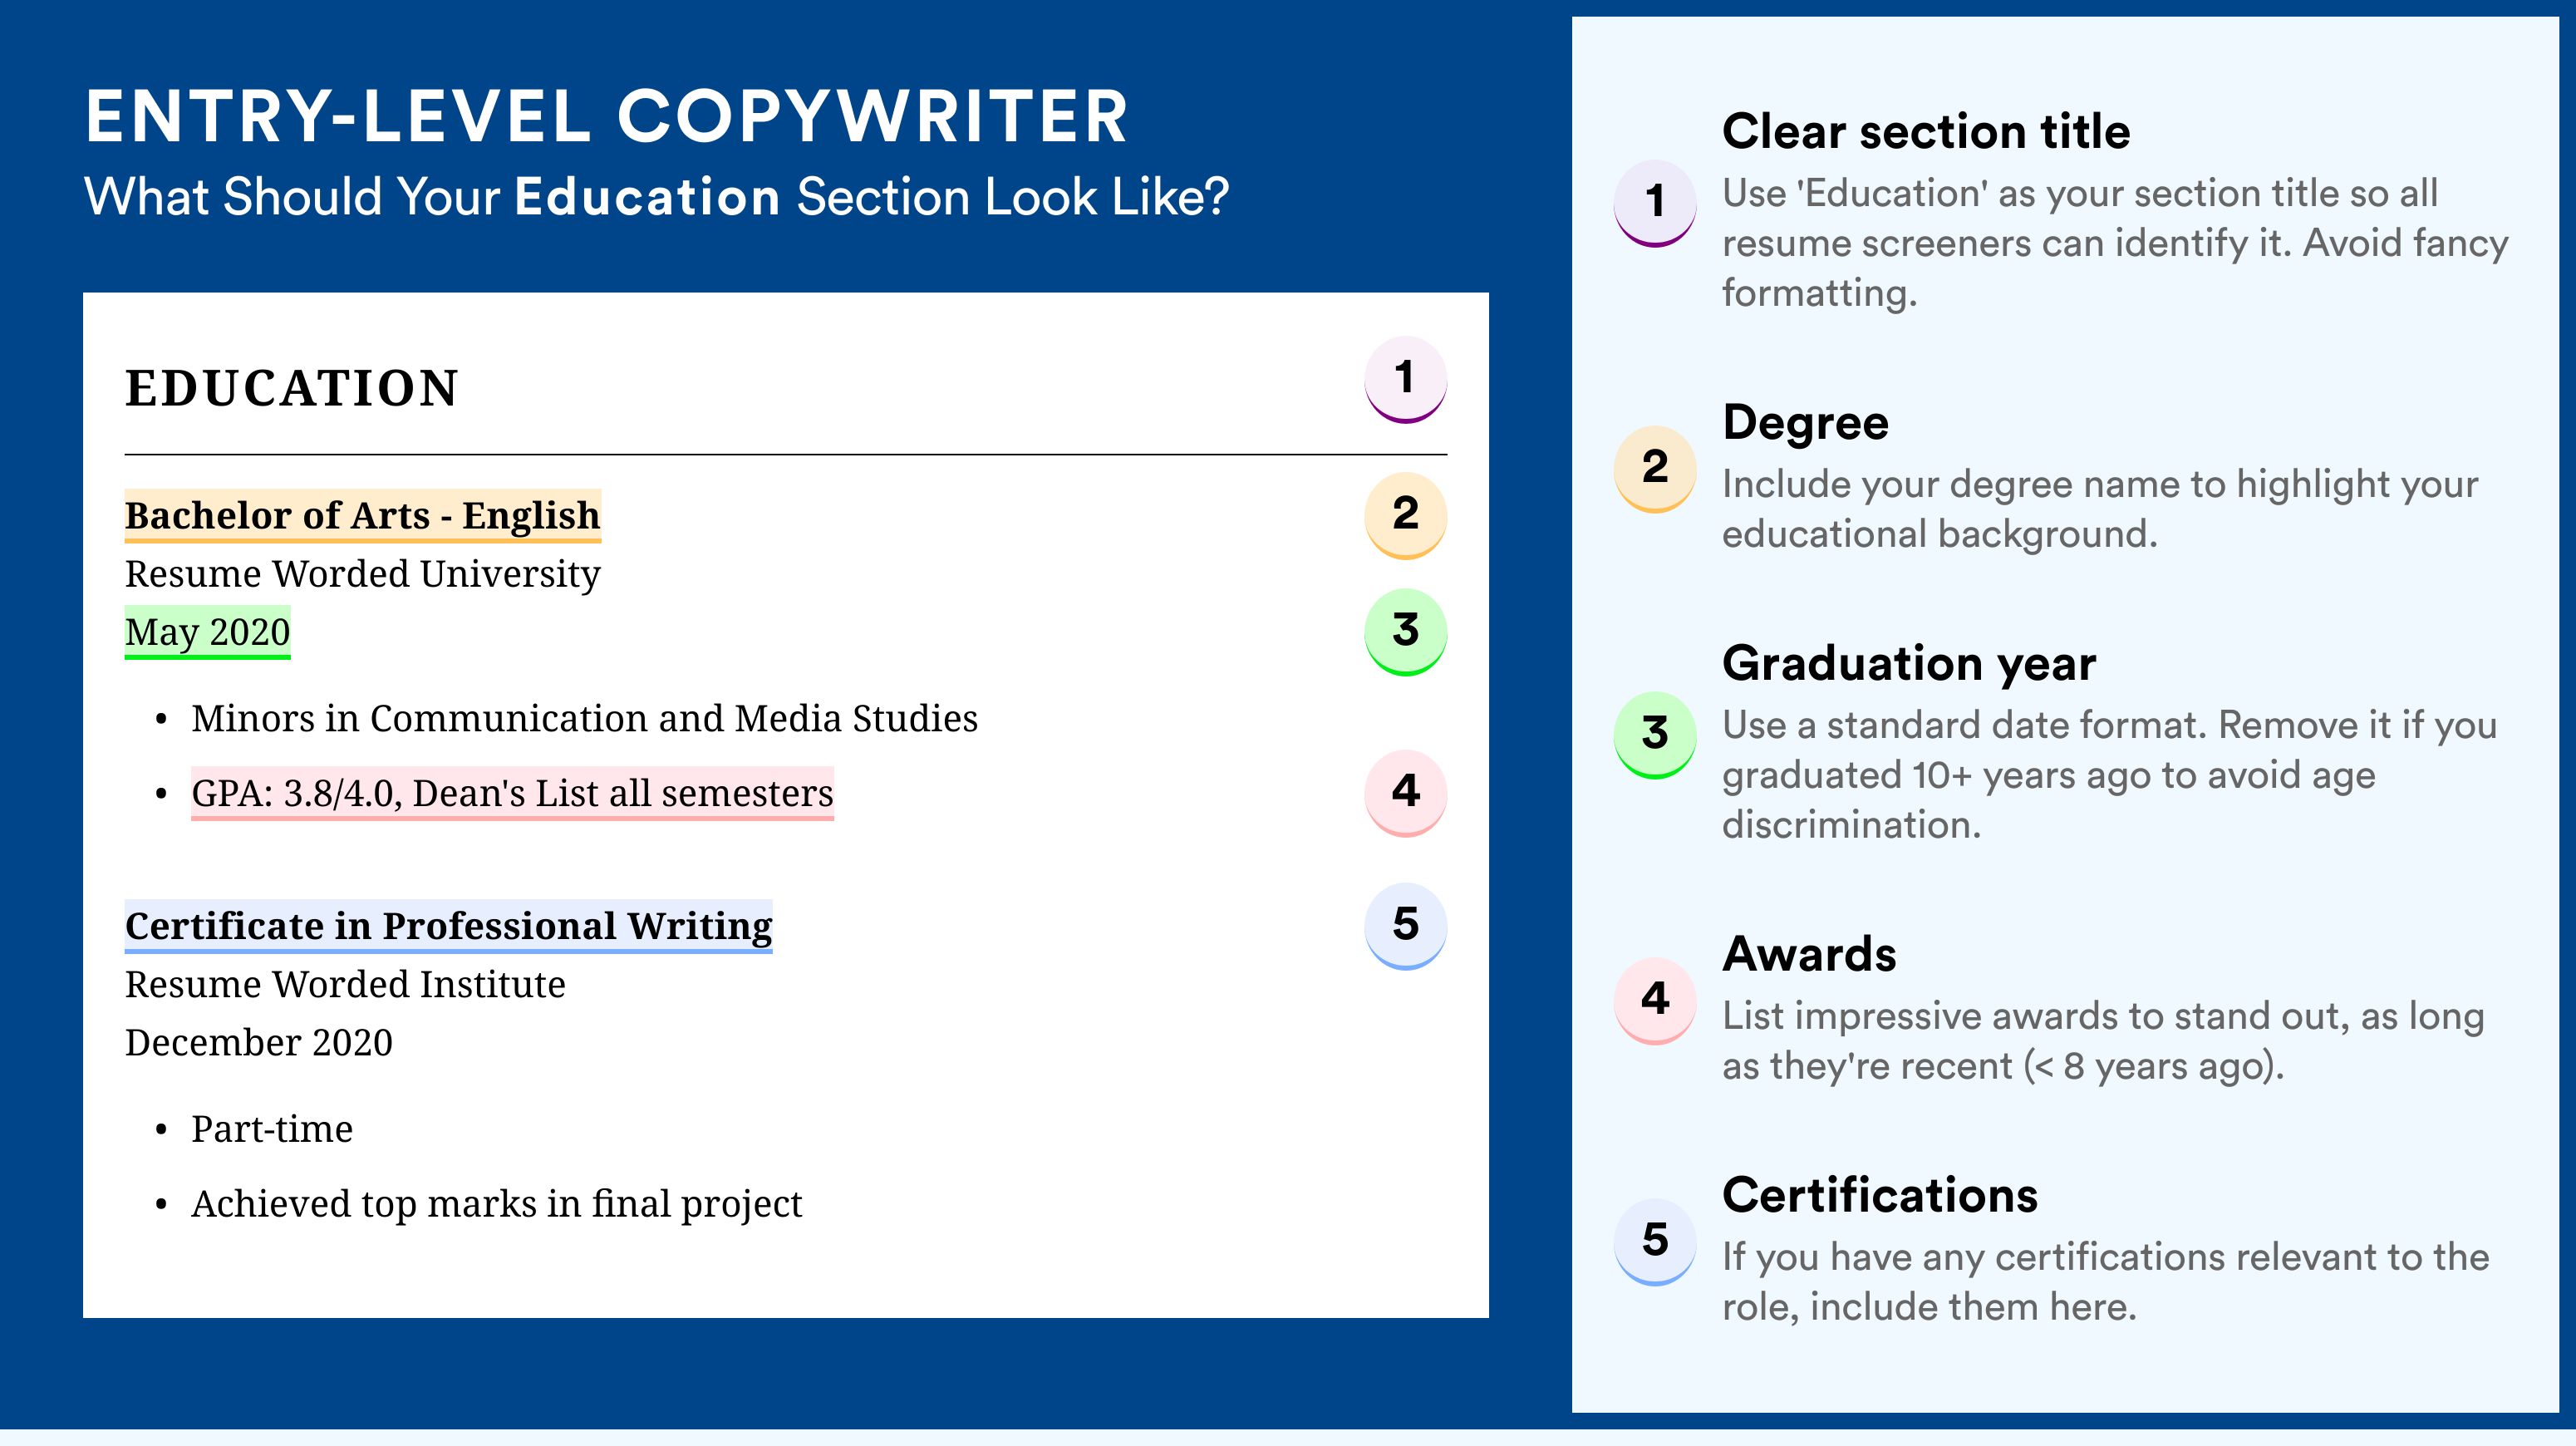 How To Write An Education Section - Entry-Level Copywriter Roles